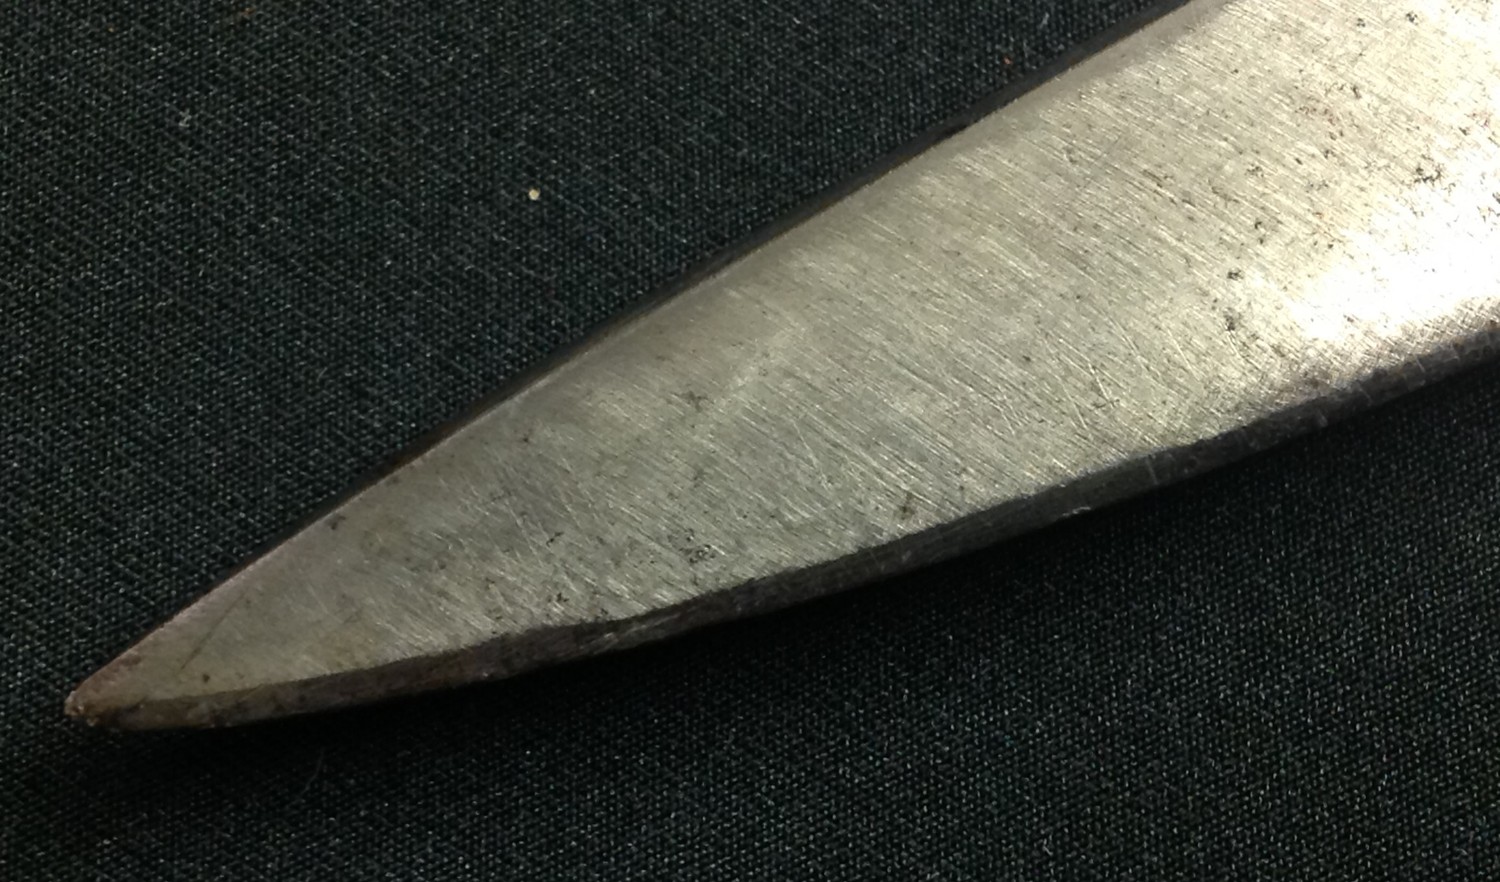 WW1 British 1907 Pattern Bayonet maker marked and dated Wilkinson 7 16. No release catch. Single - Image 6 of 8